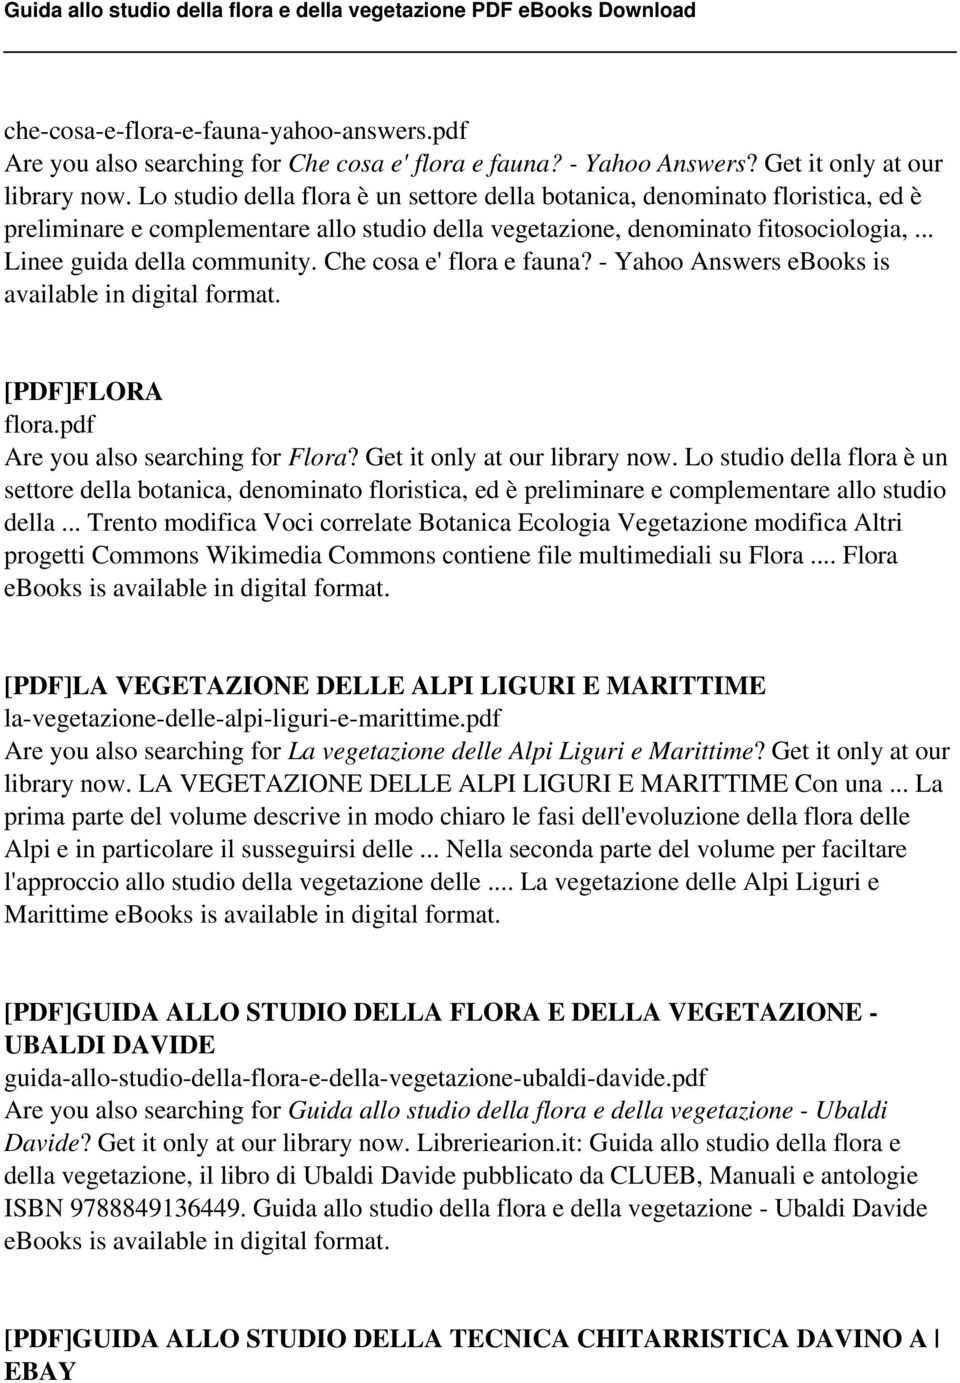 Che cosa e' flora e fauna? - Yahoo Answers ebooks is available in digital format. [PDF]FLORA flora.pdf Are you also searching for Flora? Get it only at our library now.